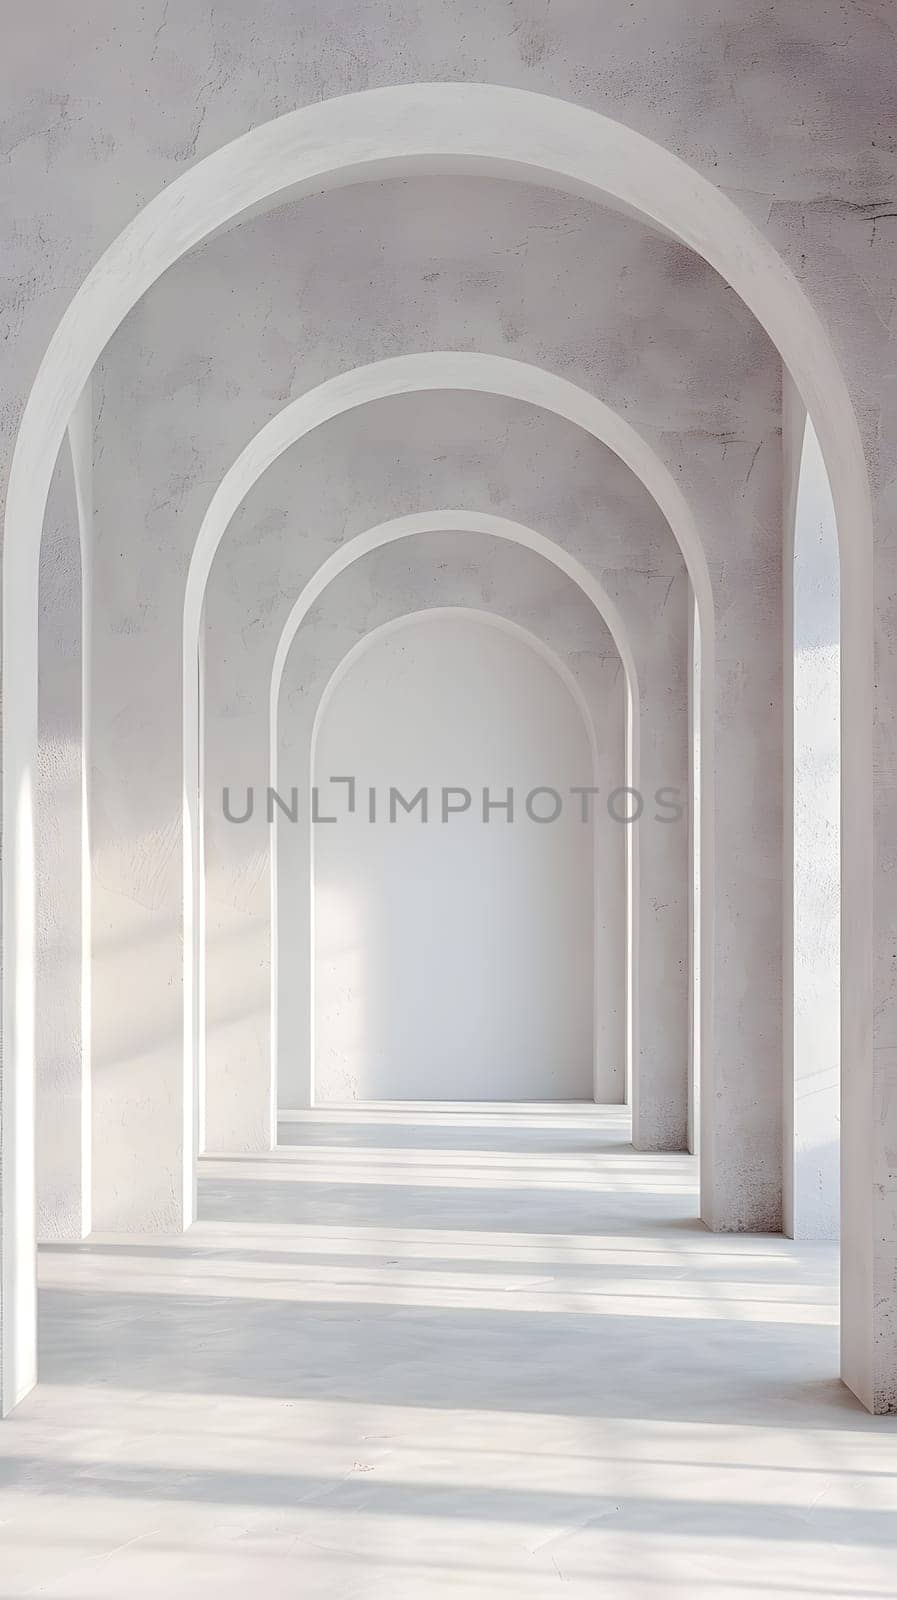 Arcade with arches and columns, symmetrical design in a concrete building by Nadtochiy